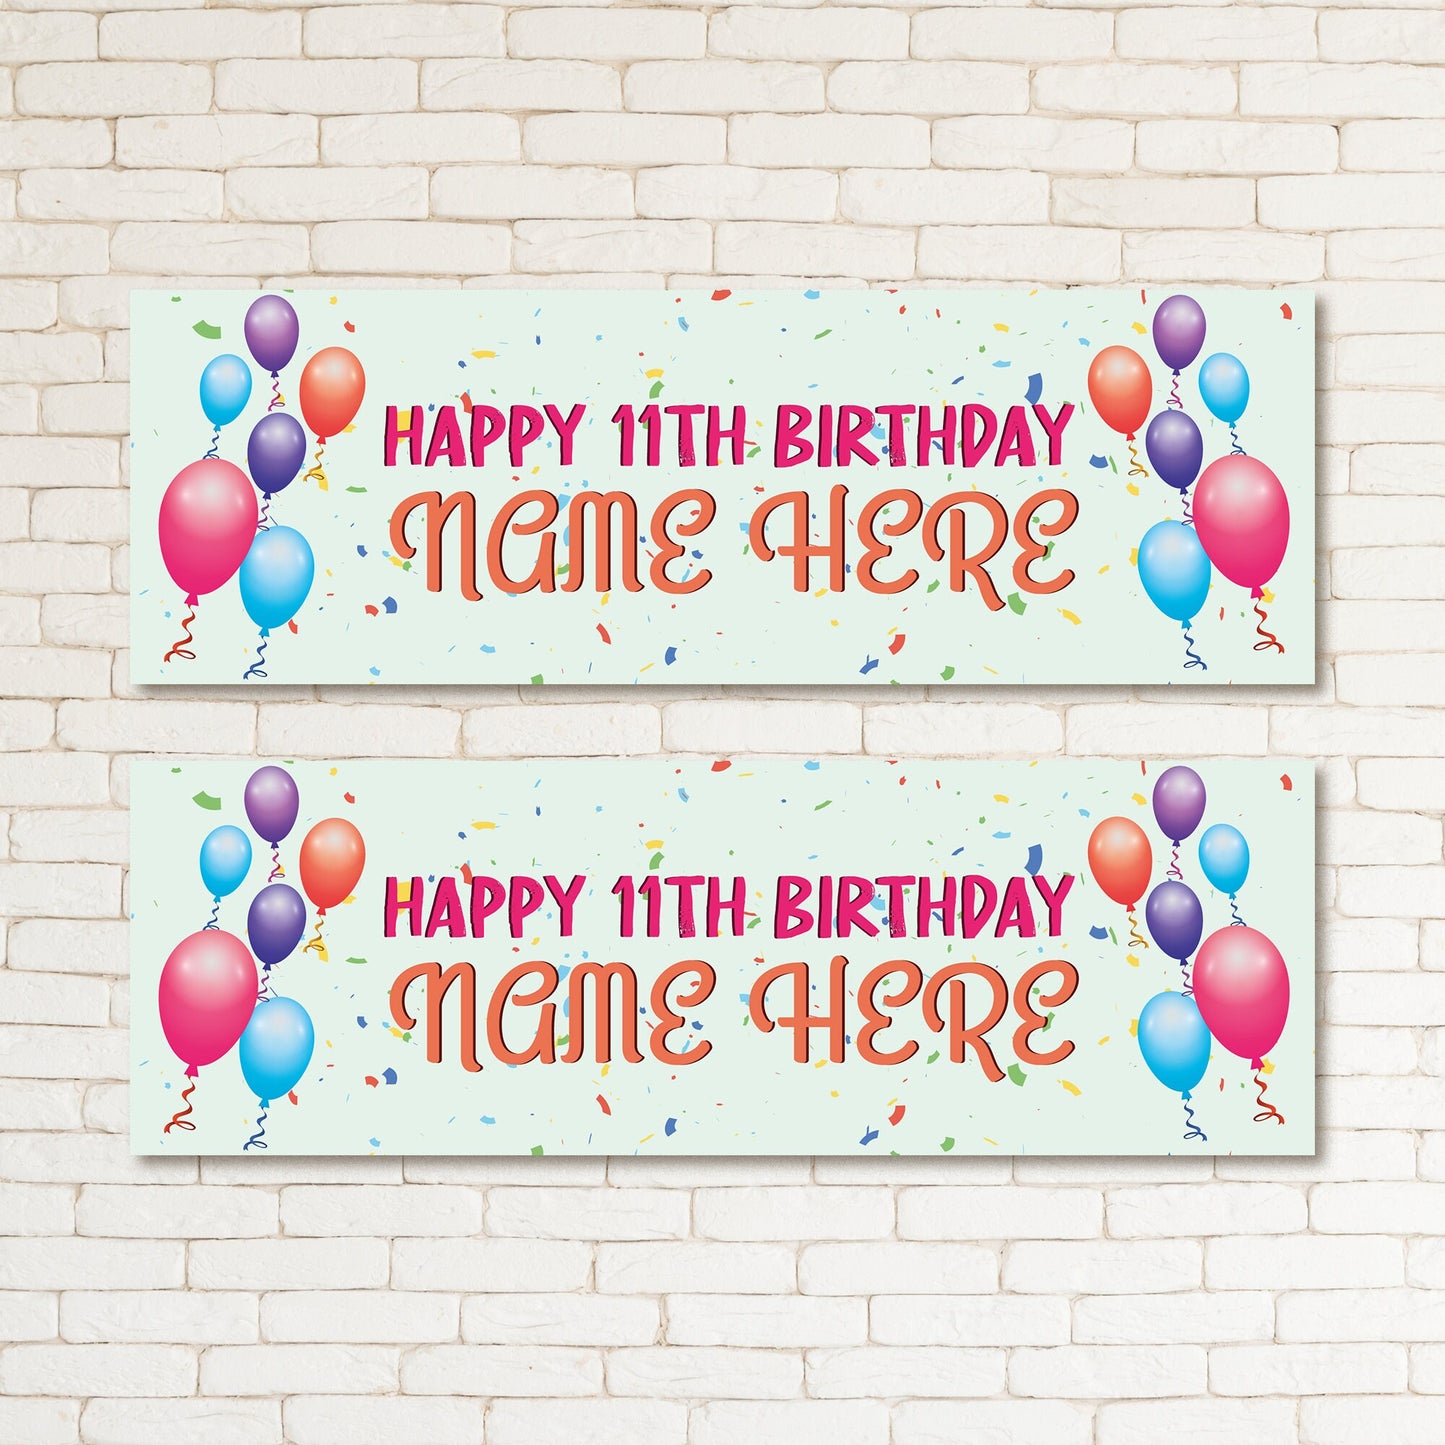 Set of 2 Personalised Birthday Banners - 16th 18th 21st 30th 40th 50th Birthday Party - Celebration - Occasion BBAN-0727